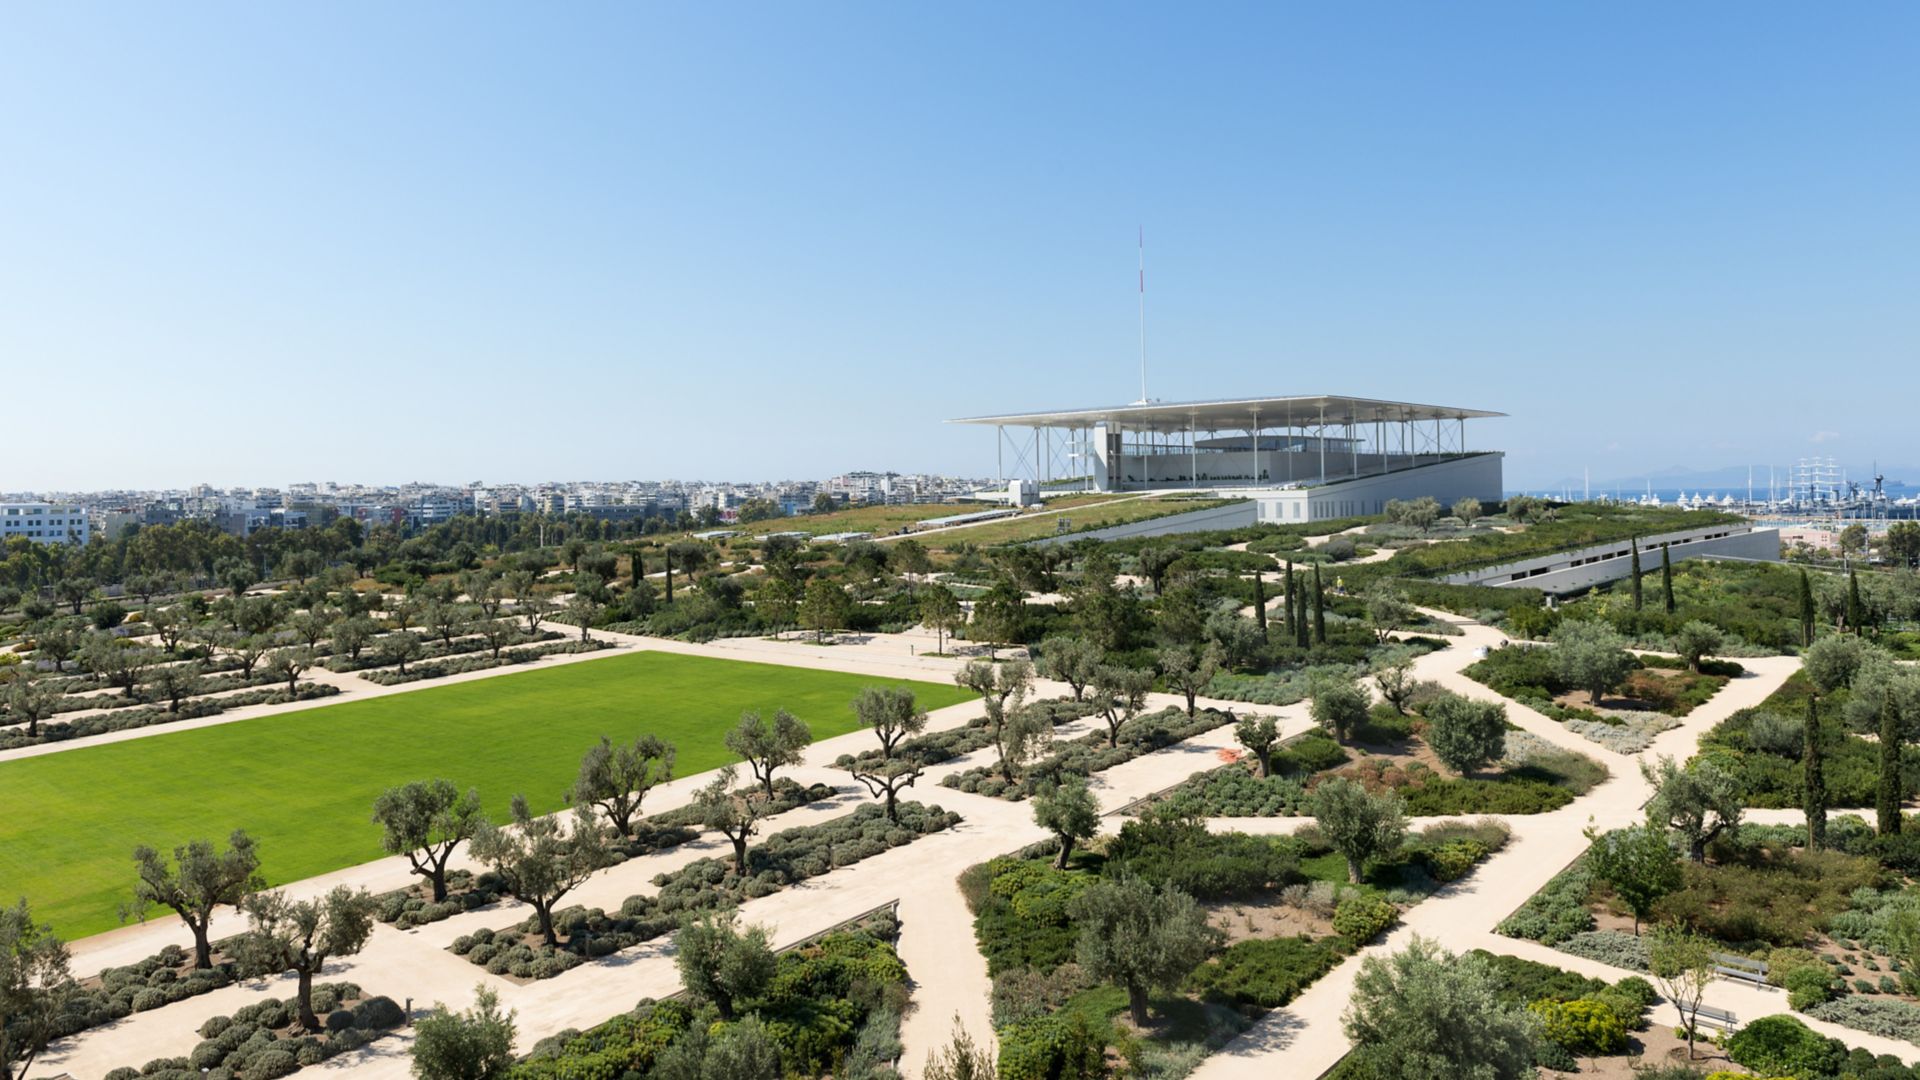 The green areas at the Stavros Niarchos Park in Greece